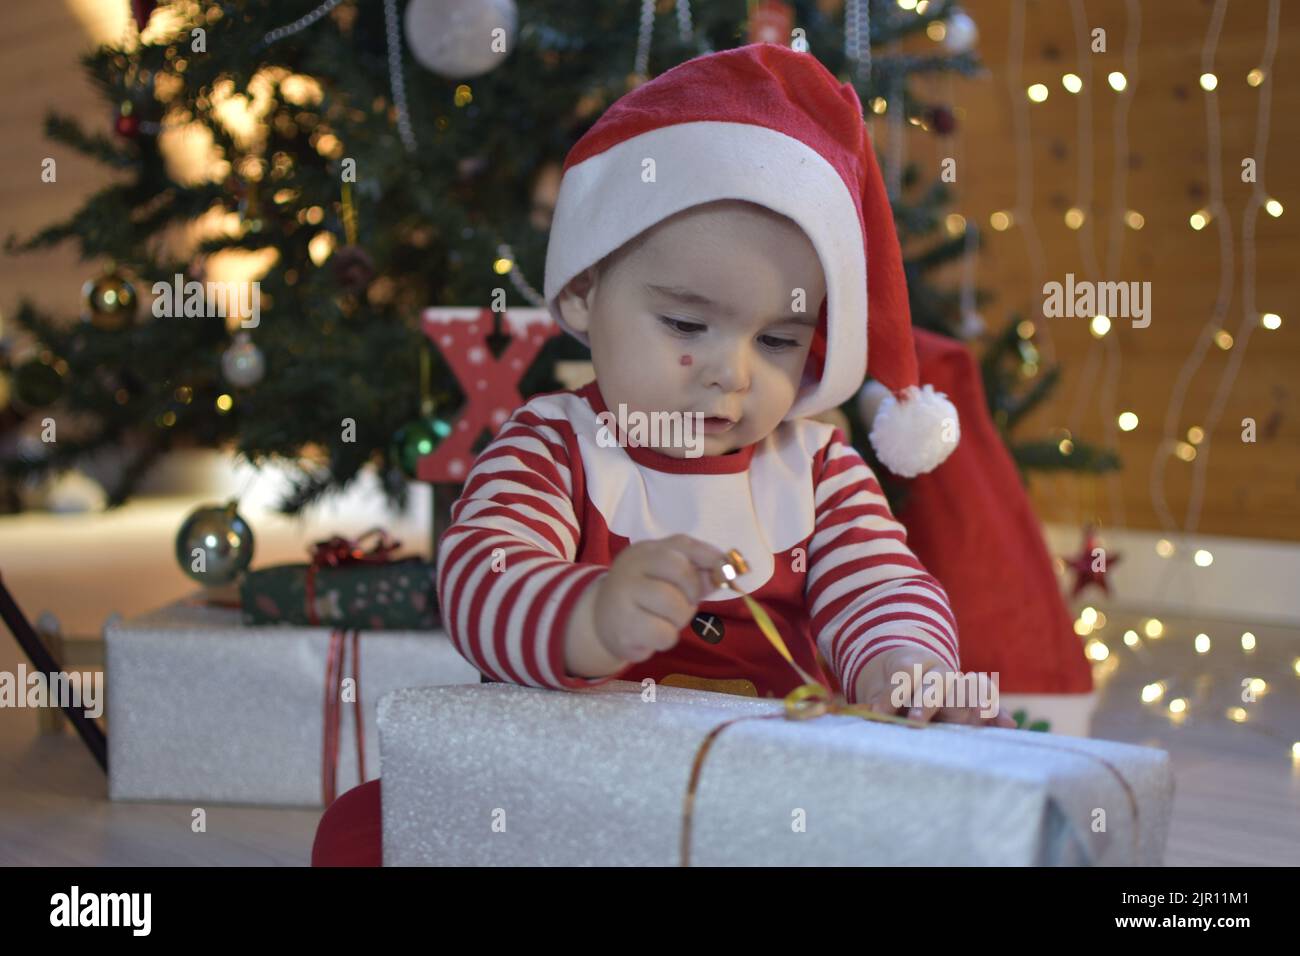 Twelve months old baby opening a Christmas gift. baby dressed as santa claus opening gift. cute baby next to the christmas tree.excited to open gift Stock Photo